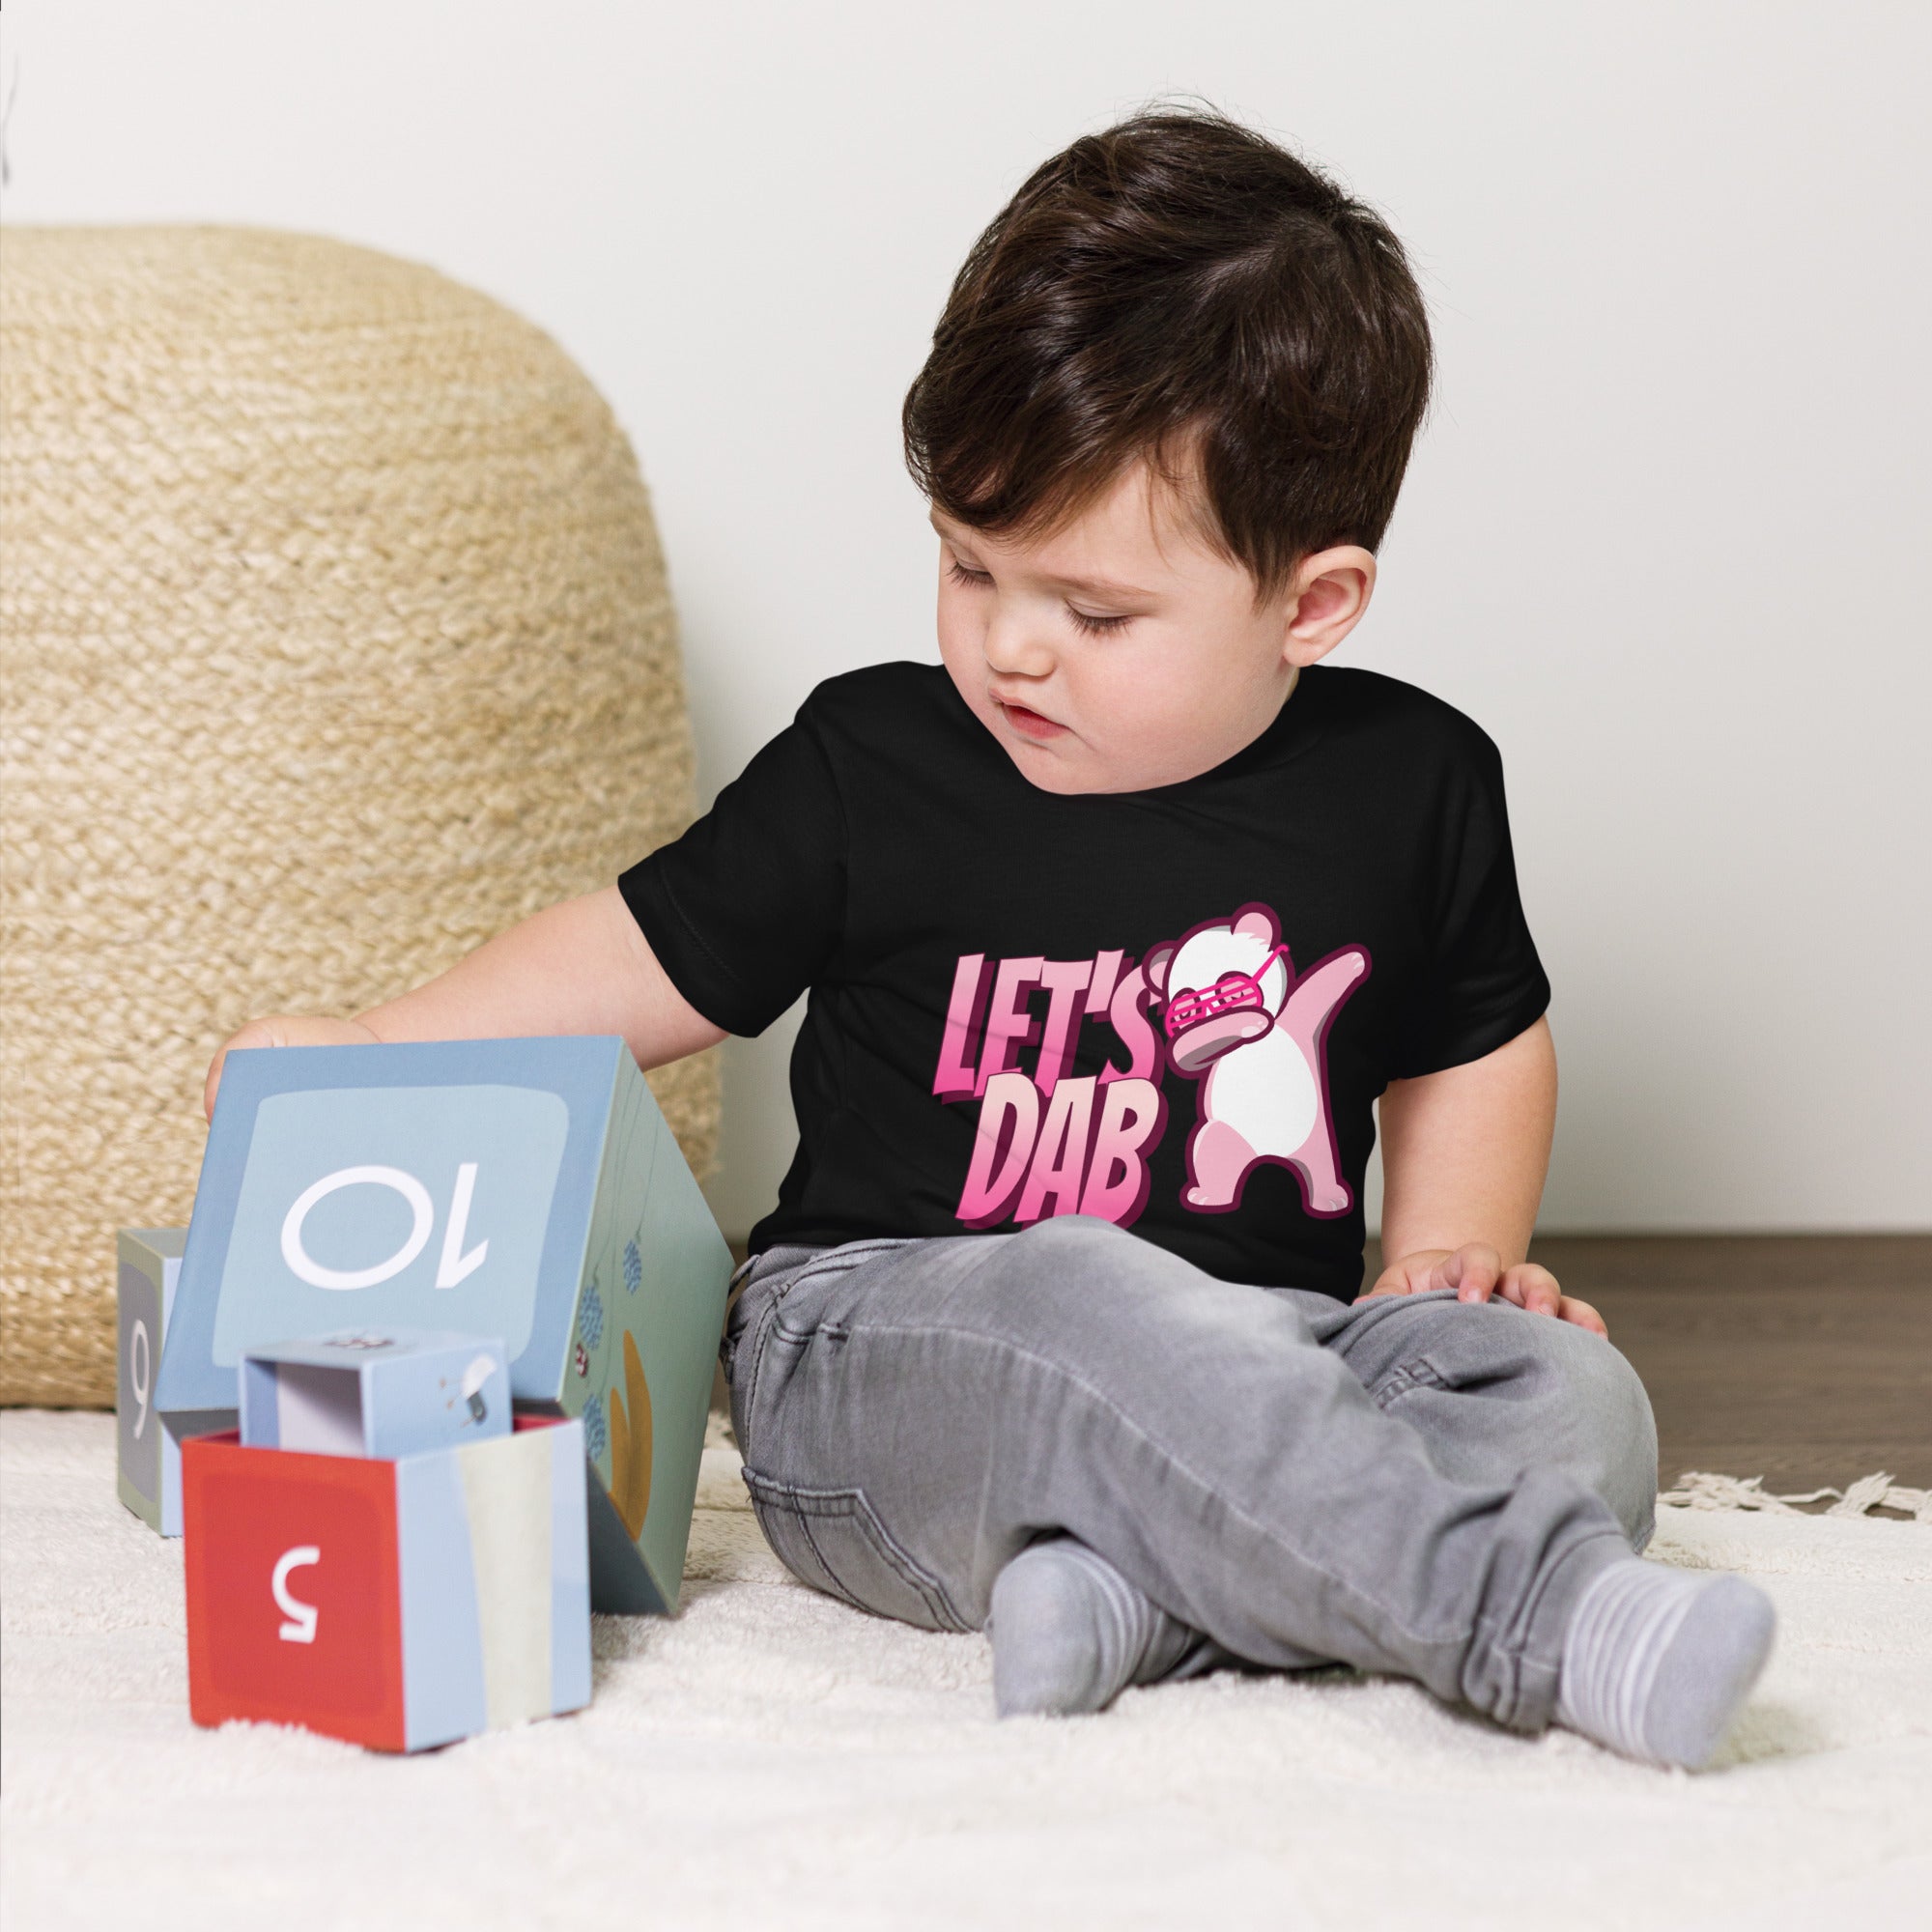 Let's dab - Toddler Short Sleeve Tee